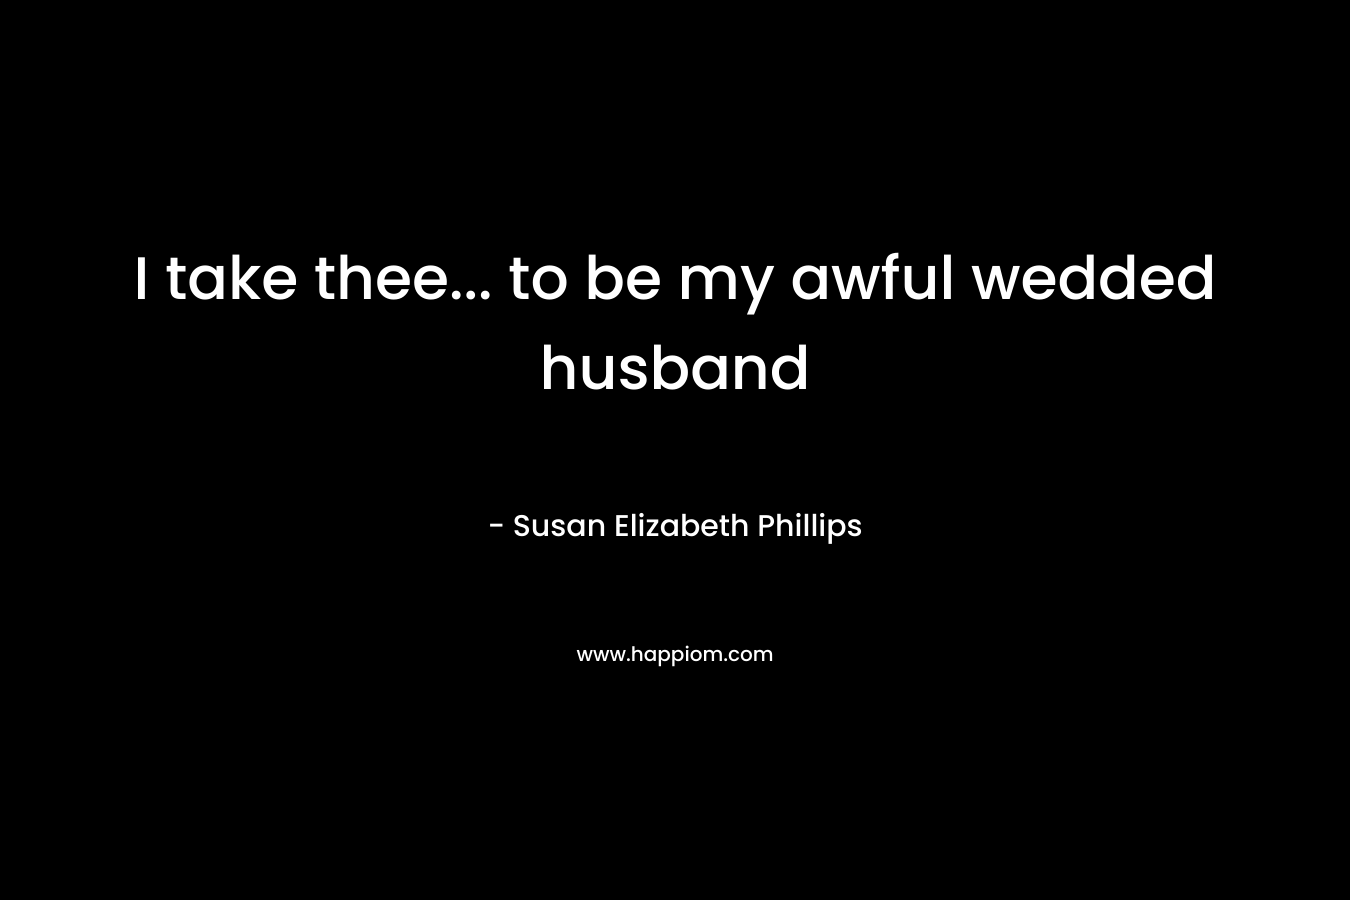 I take thee... to be my awful wedded husband